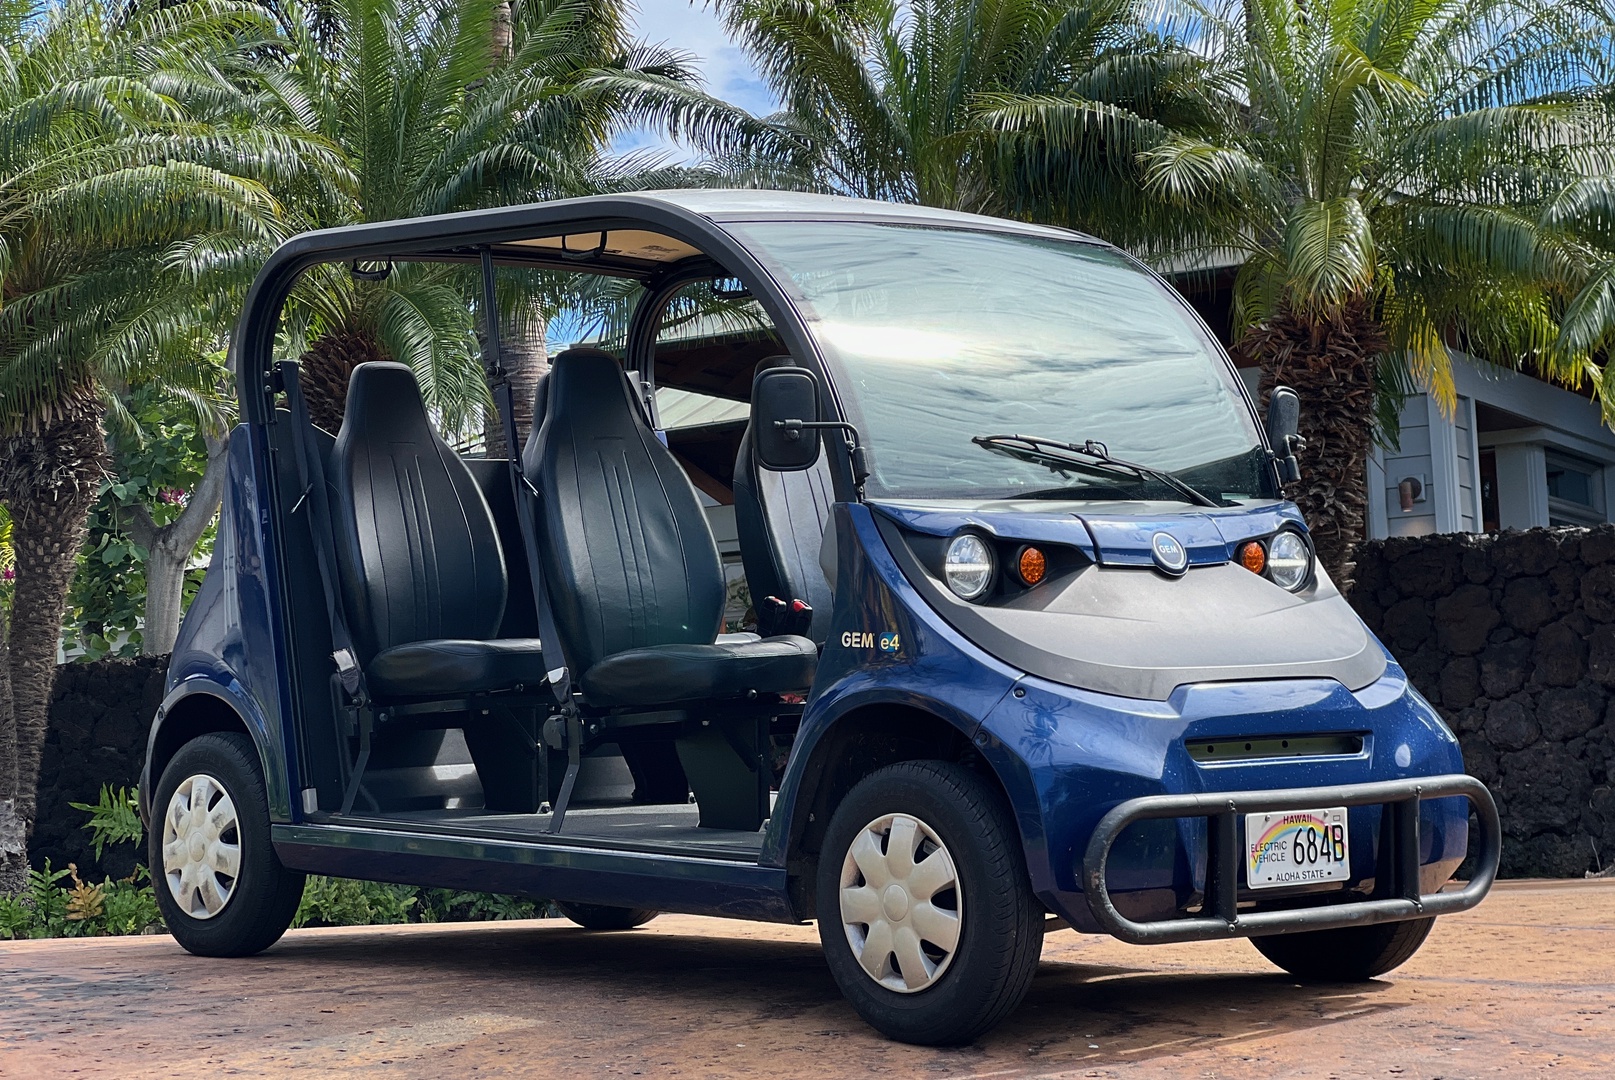 Kamuela Vacation Rentals, 3BD Na Hale 3 at Pauoa Beach Club at Mauna Lani Resort - Explore the resort in style with our Polaris 4-Seater Gem Car, included in your rental